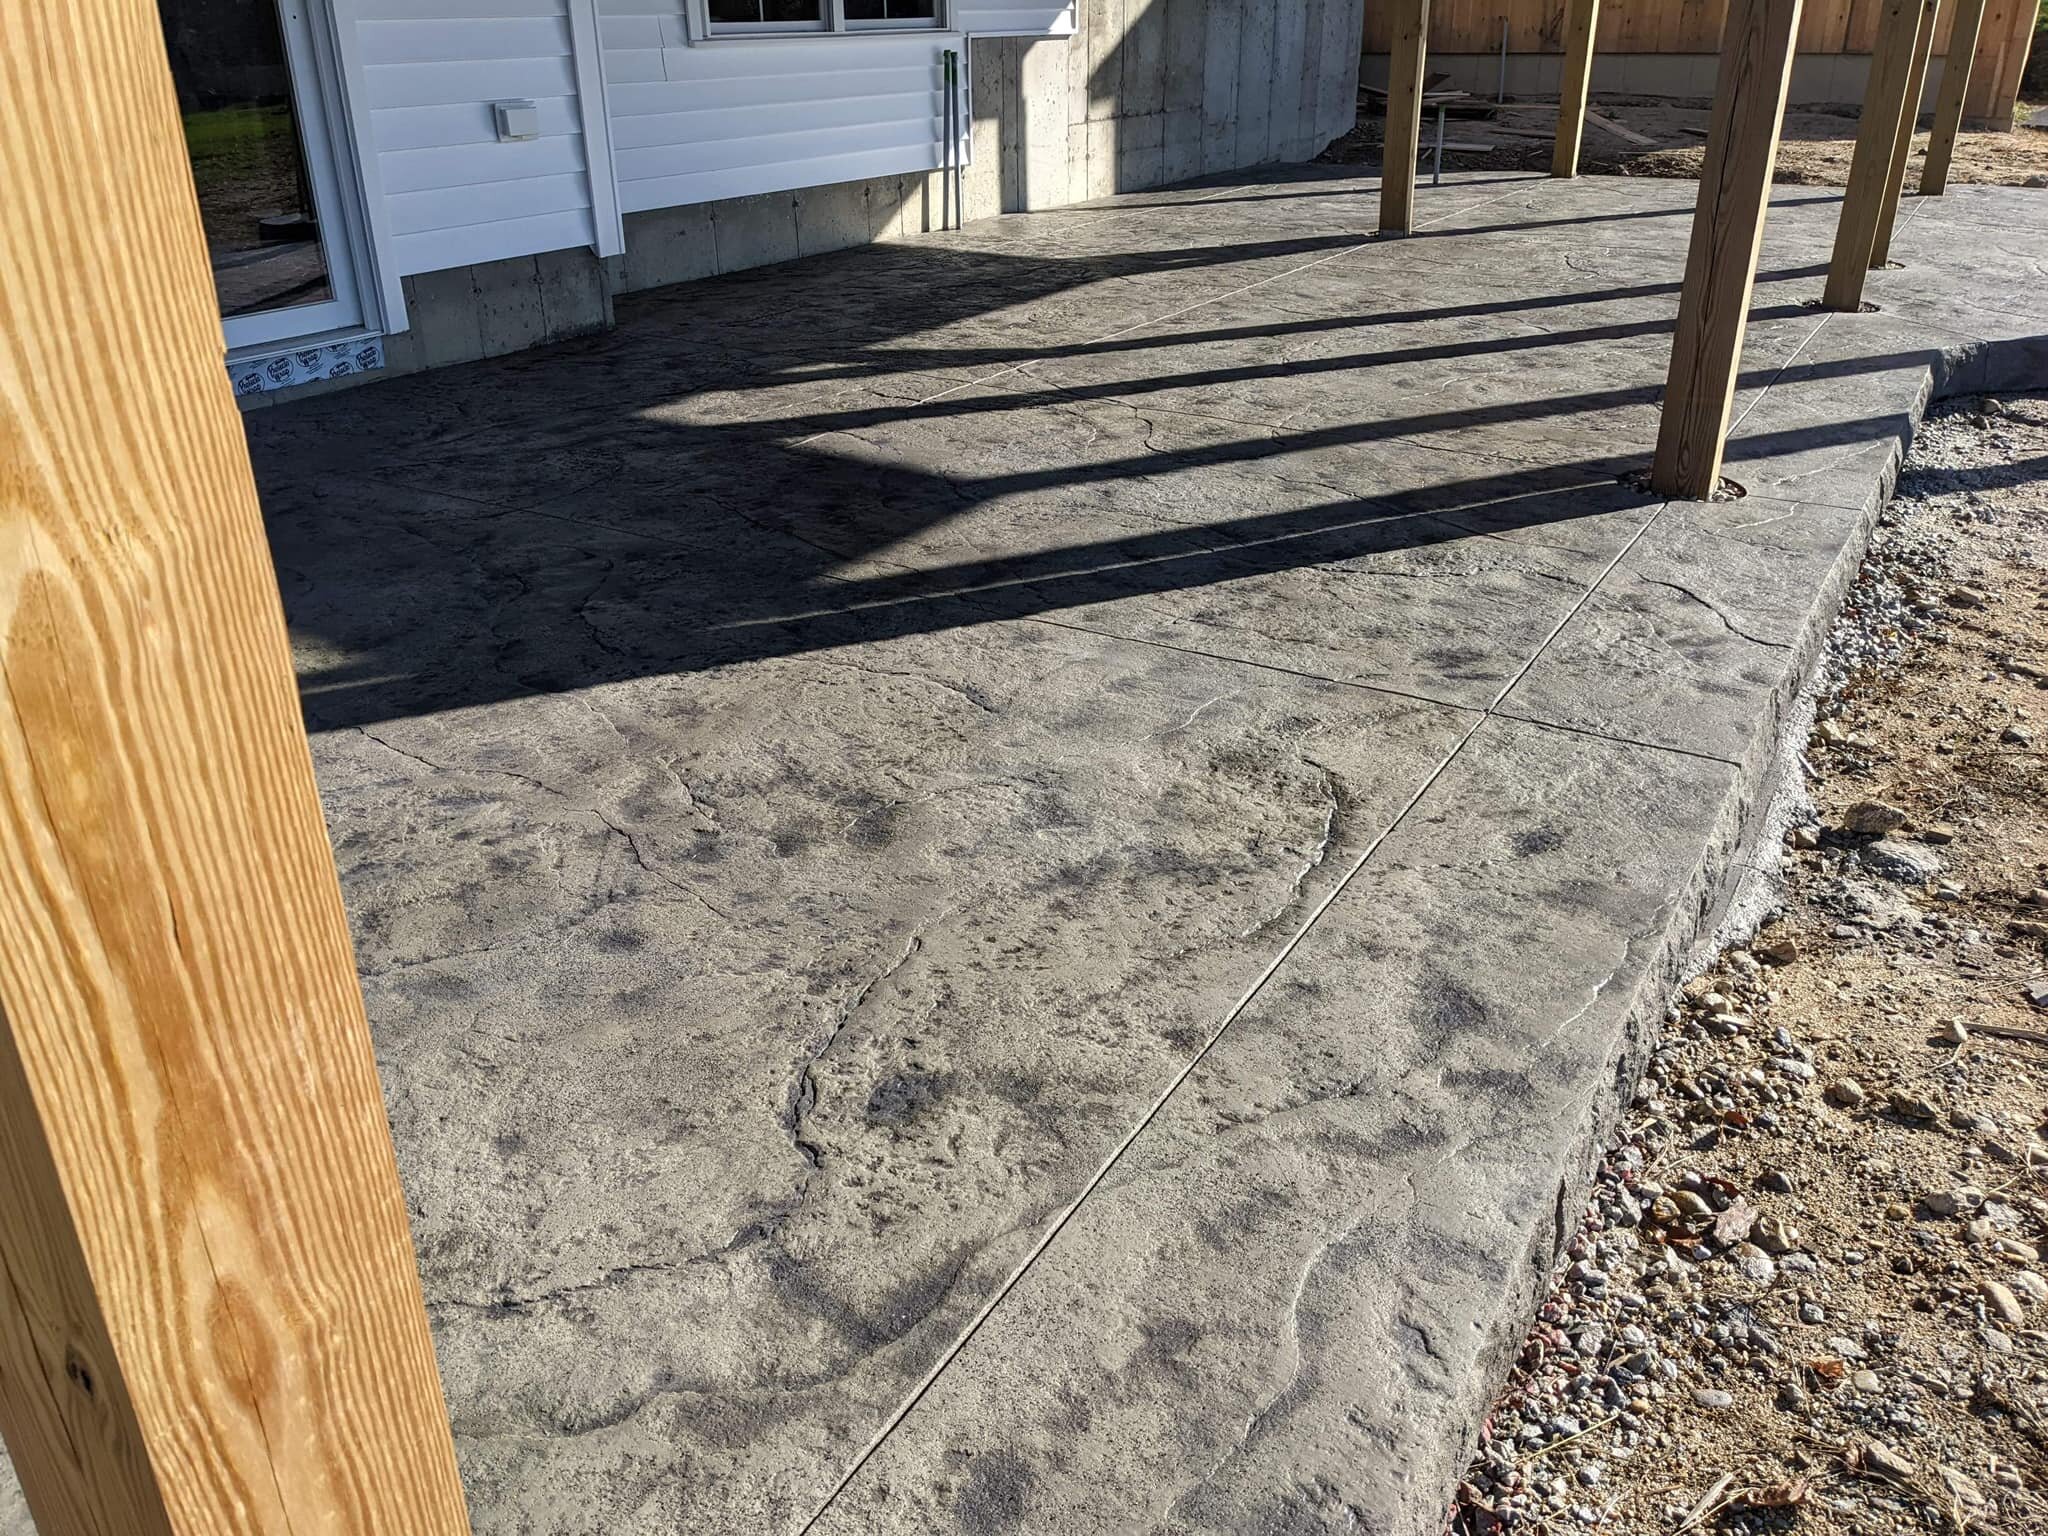 Last couple stamped concrete projects for the year. Looking forward to creating great projects next year!